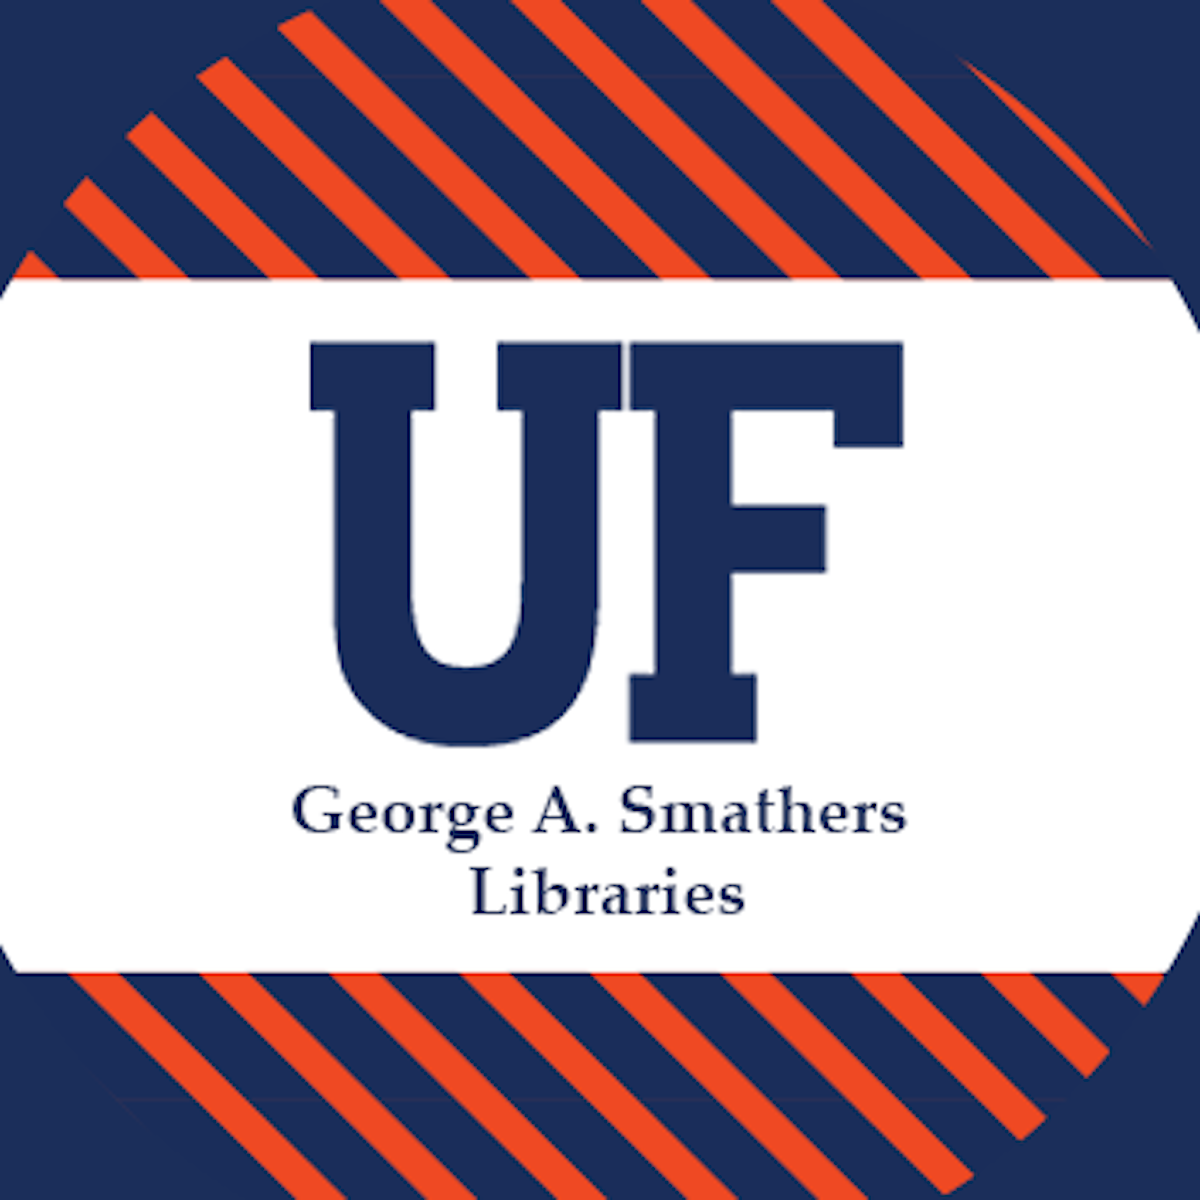 George A. Smathers Libraries logo